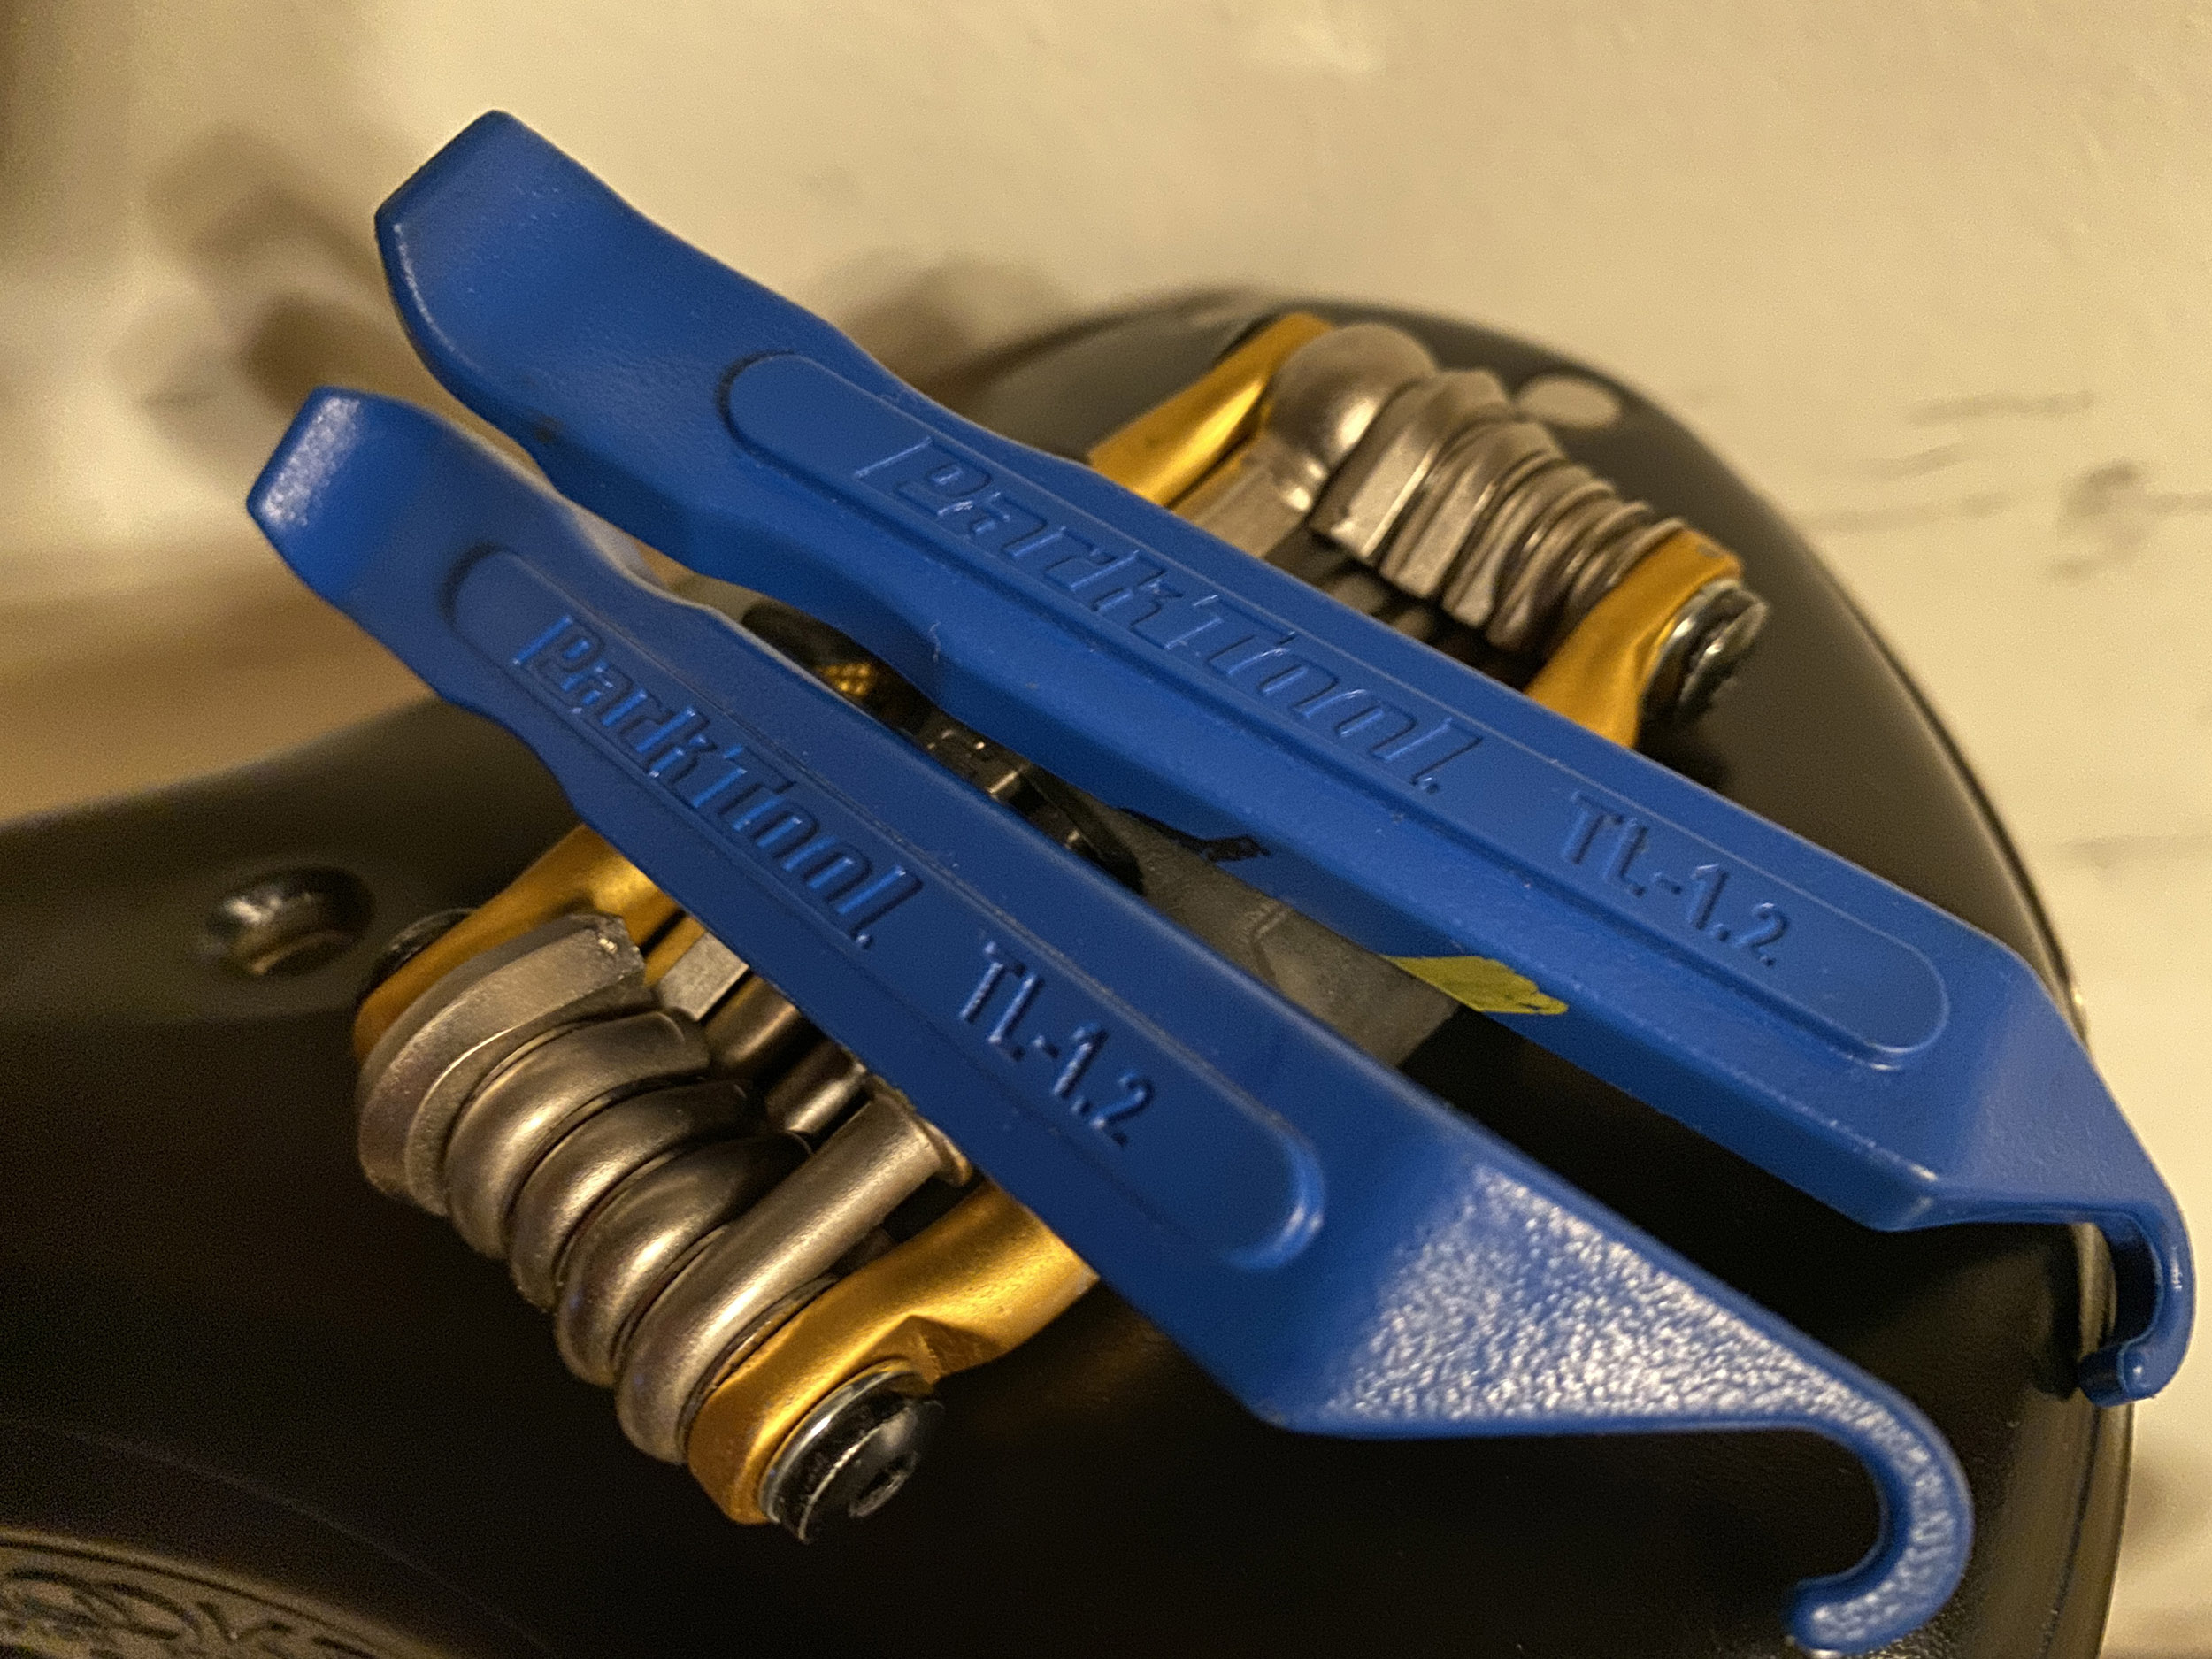 Tire levers and multi-tool